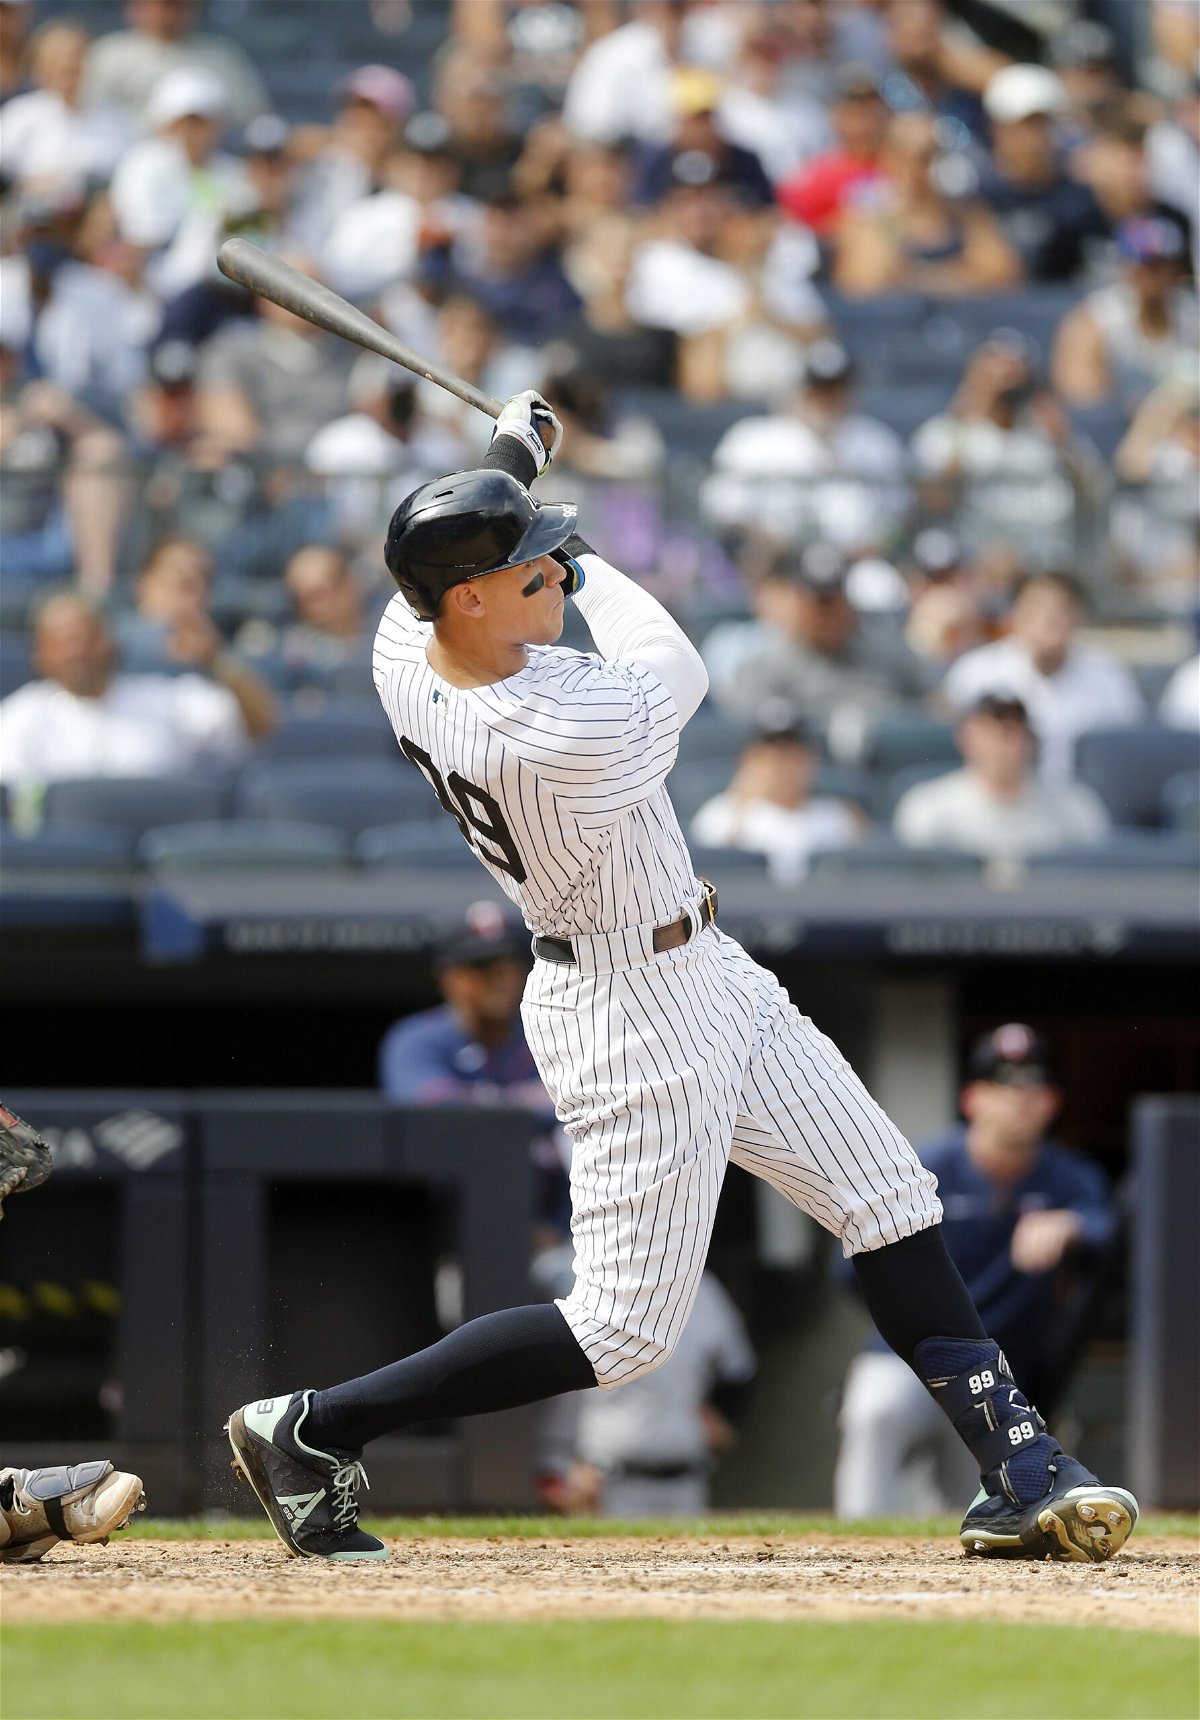 New York Yankees OF Aaron Judge Hits Two More Home Runs to Close